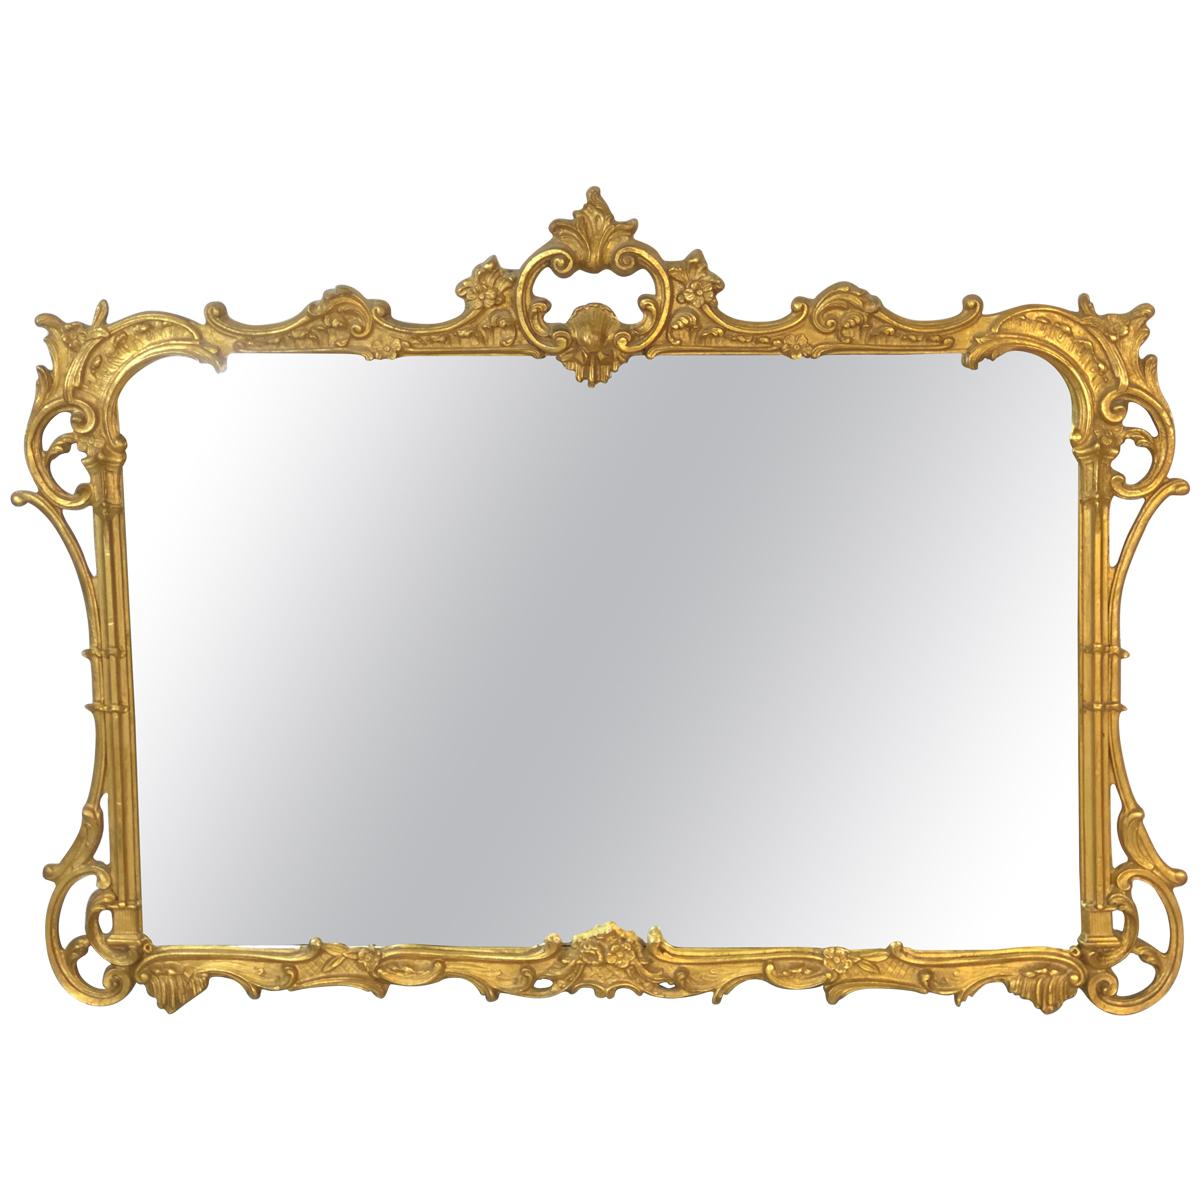 The House of Dinsmore Mirror by Friedman Brothers Decorative Arts Co. For Sale